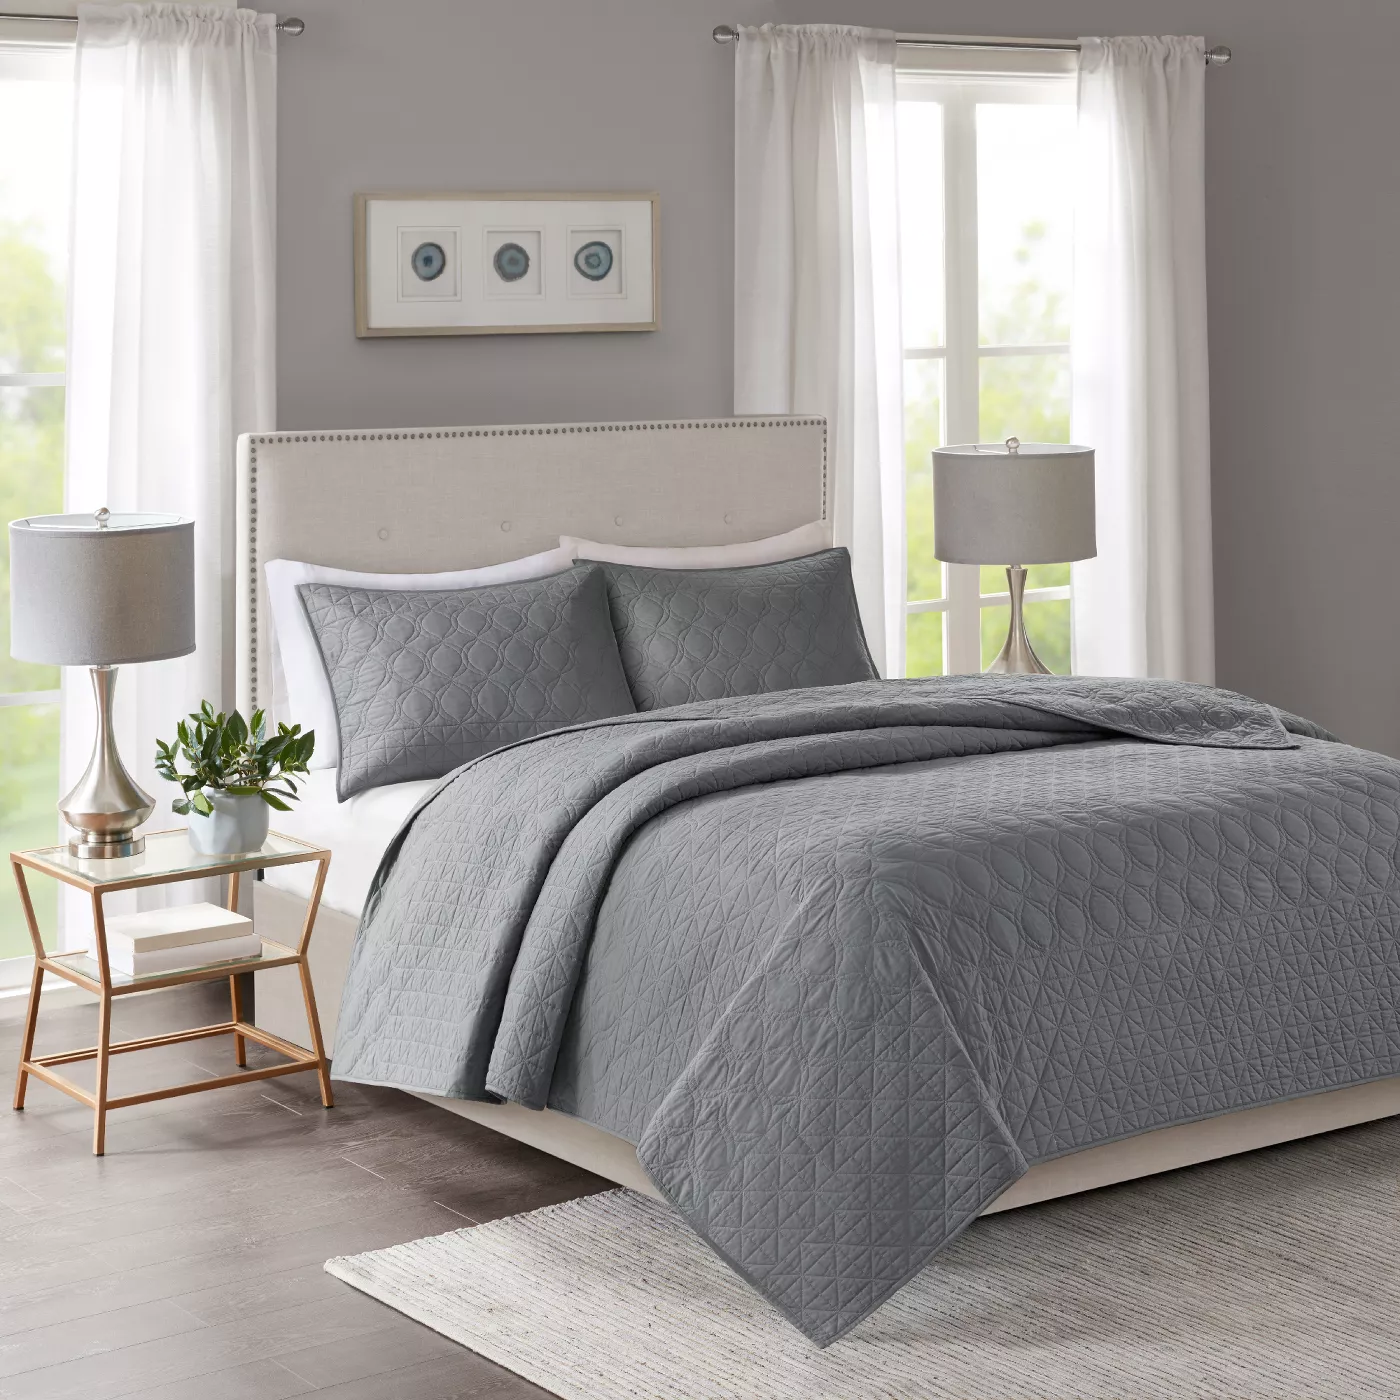 Hollie Coverlet Set 3pc - image 1 of 6